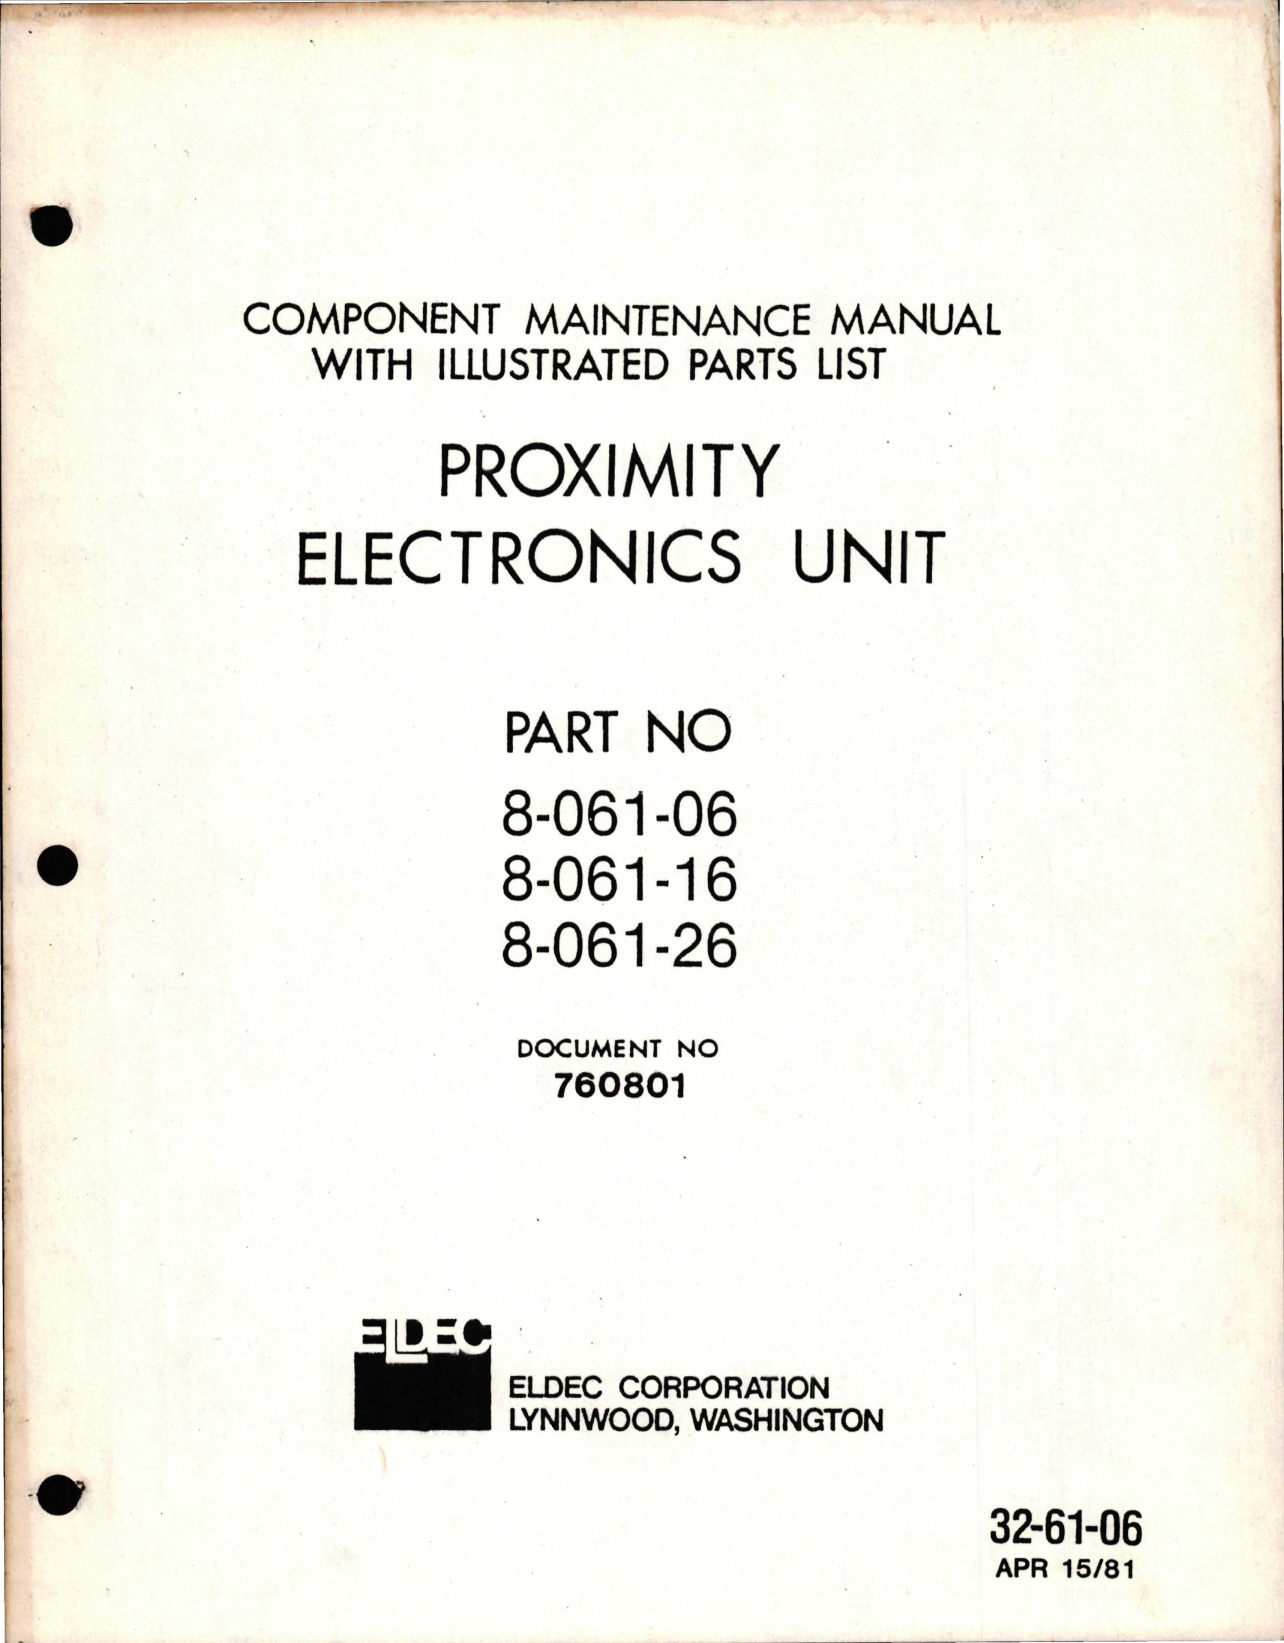 Sample page 1 from AirCorps Library document: Maintenance Manual with Illustrated Parts List for Proximity Electronics Unit - Parts 8-061-06, 8-061-16, and 8-061-26 